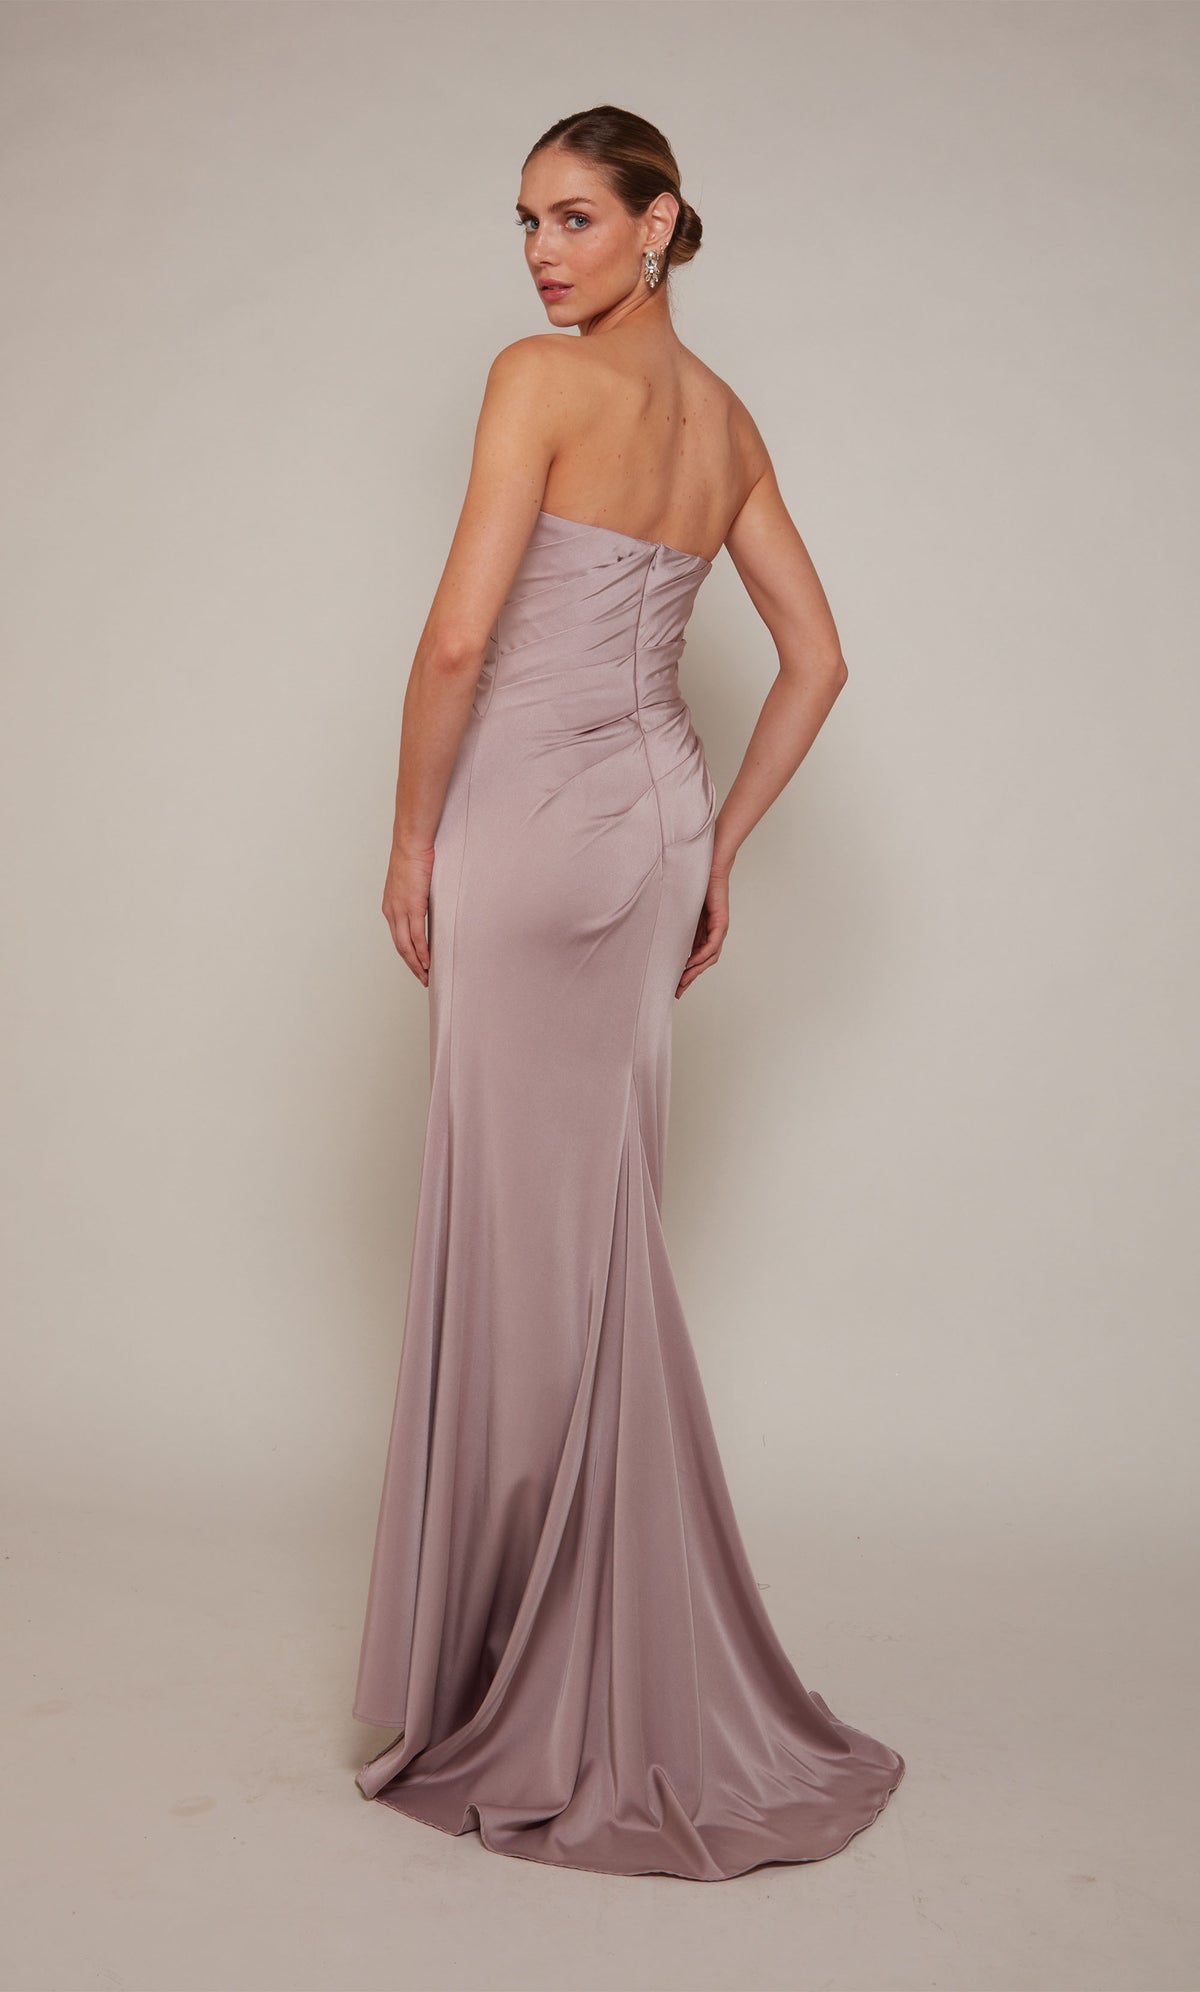 A strapless designer gown highlighting a pleated bodice and a slight train in the color rosewood.